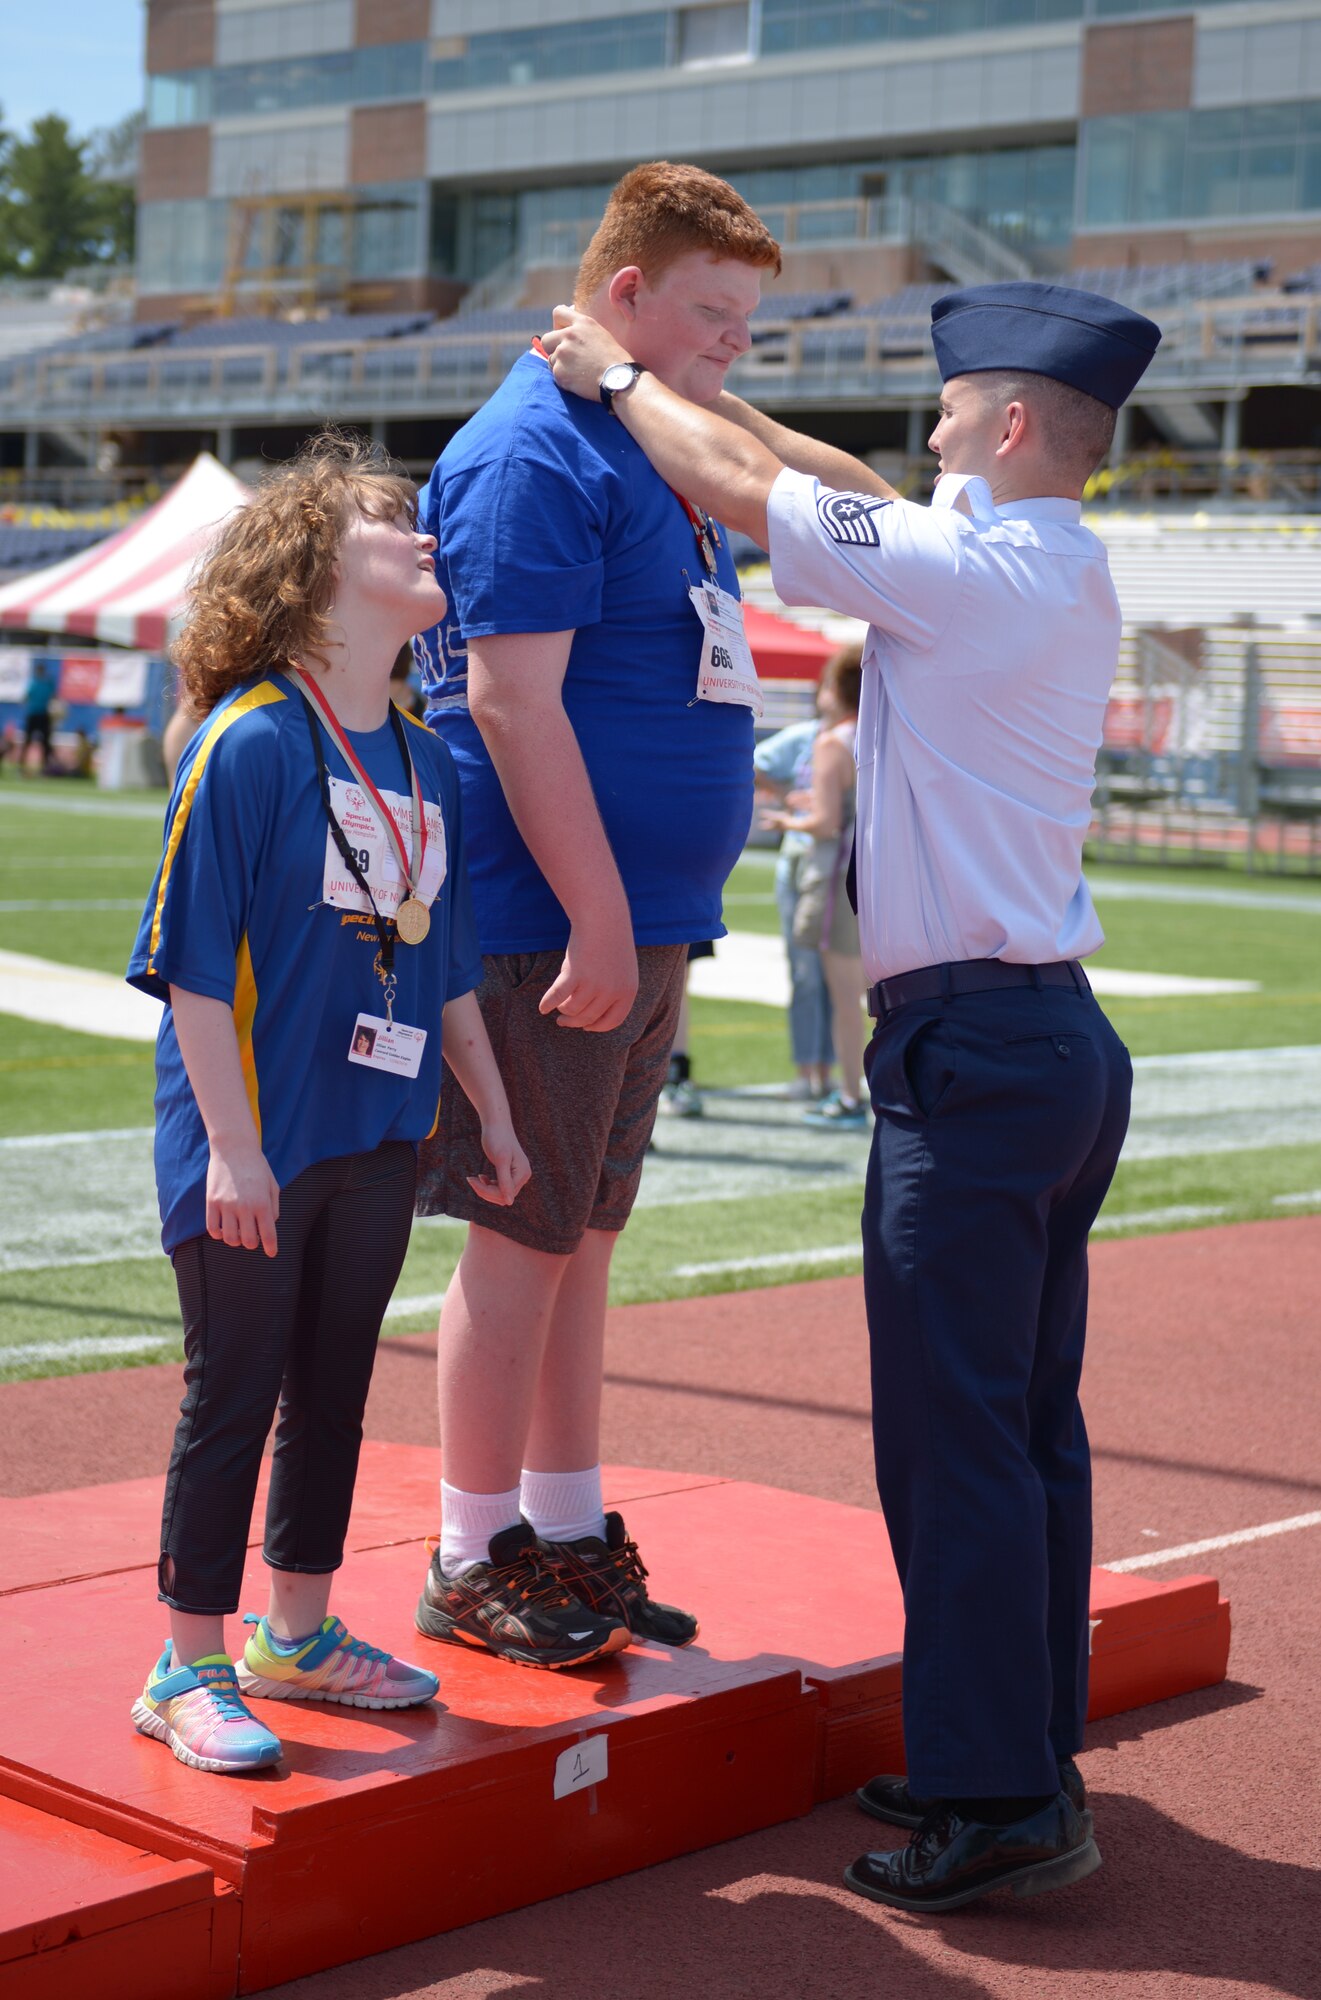 Tech. Sgt. William Cole congratulates and rewards a contestant of the 2016 Summer Special Olympics held at the University of New Hampshire June 4, 2016. Cole was volunteering for the first time at the Olympics where he was encouraging and providing support to all of the 2016 contestants. (U.S. Air National Guard photo by Senior Amn. Kayla McWalter)